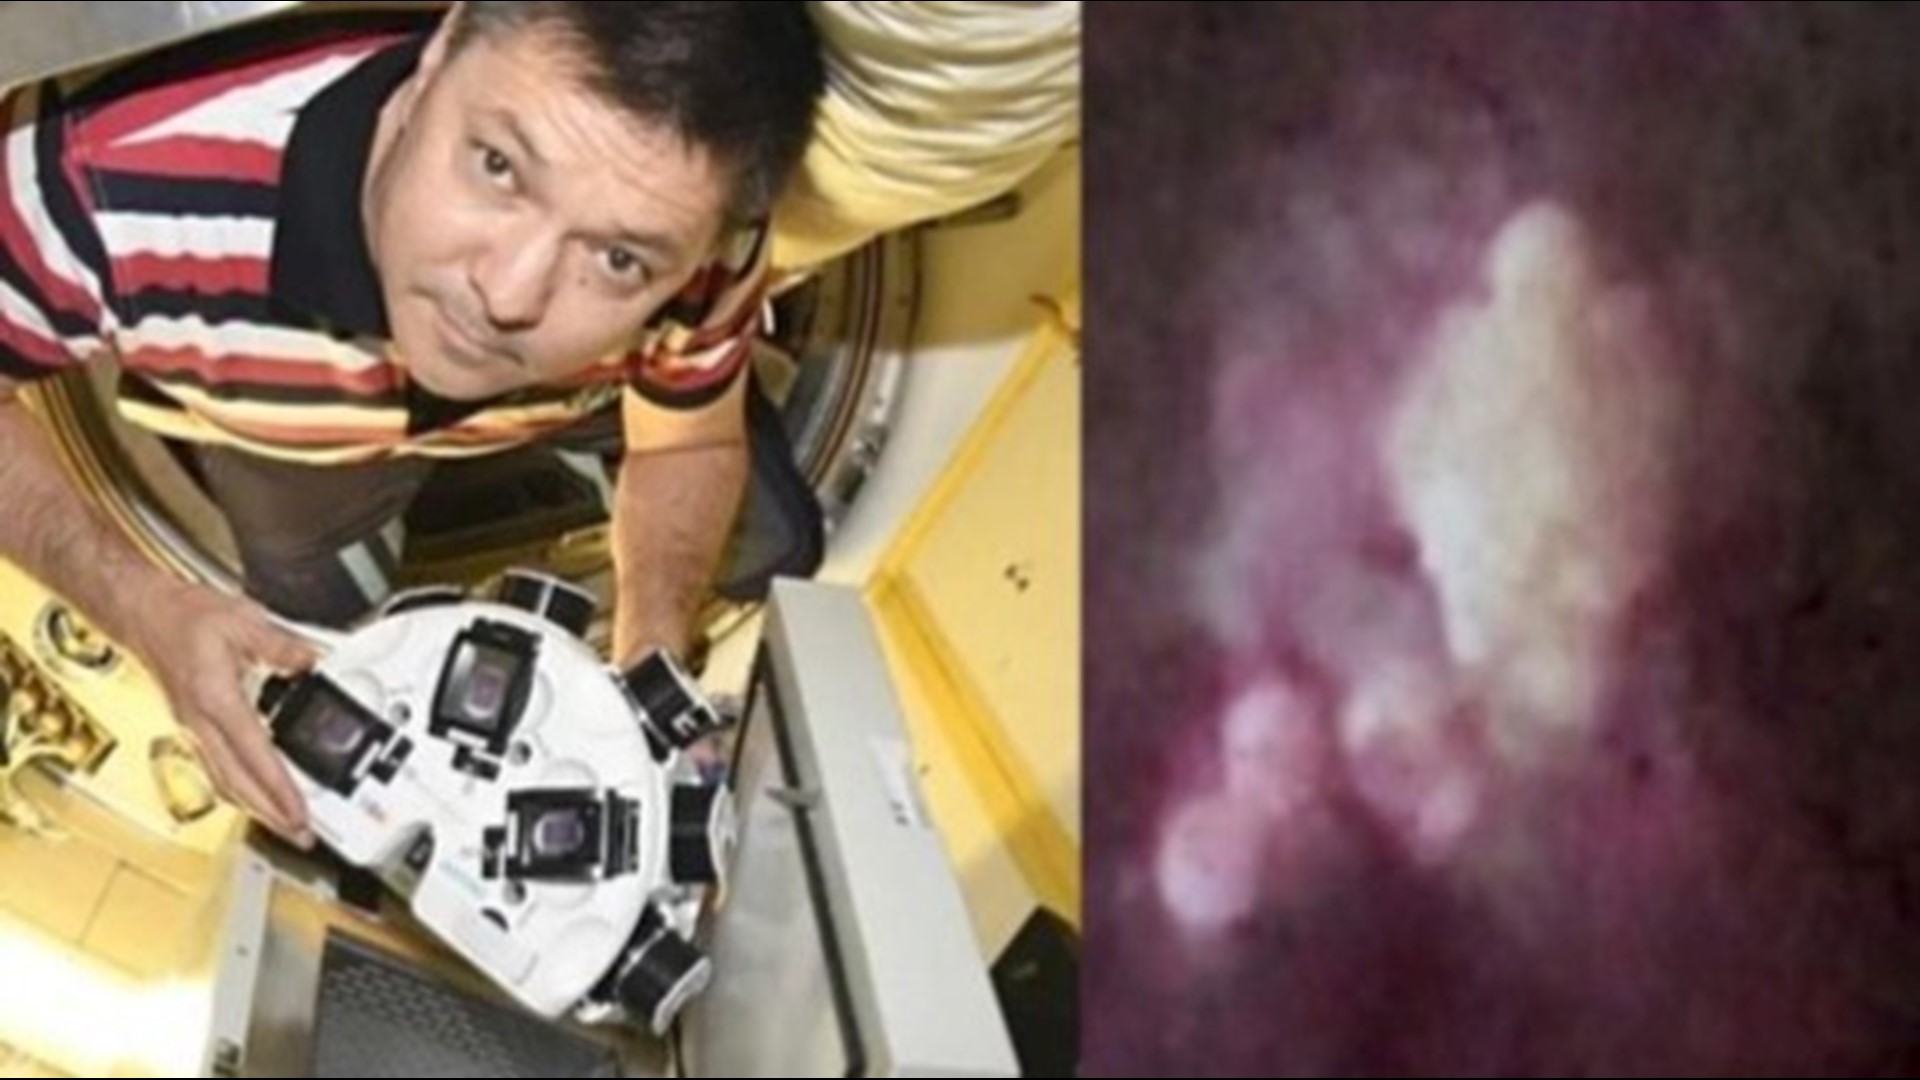 Cosmonaut Oleg Kononenko assembled human cartilage in space using magnetic fields while on board the International Space Station.